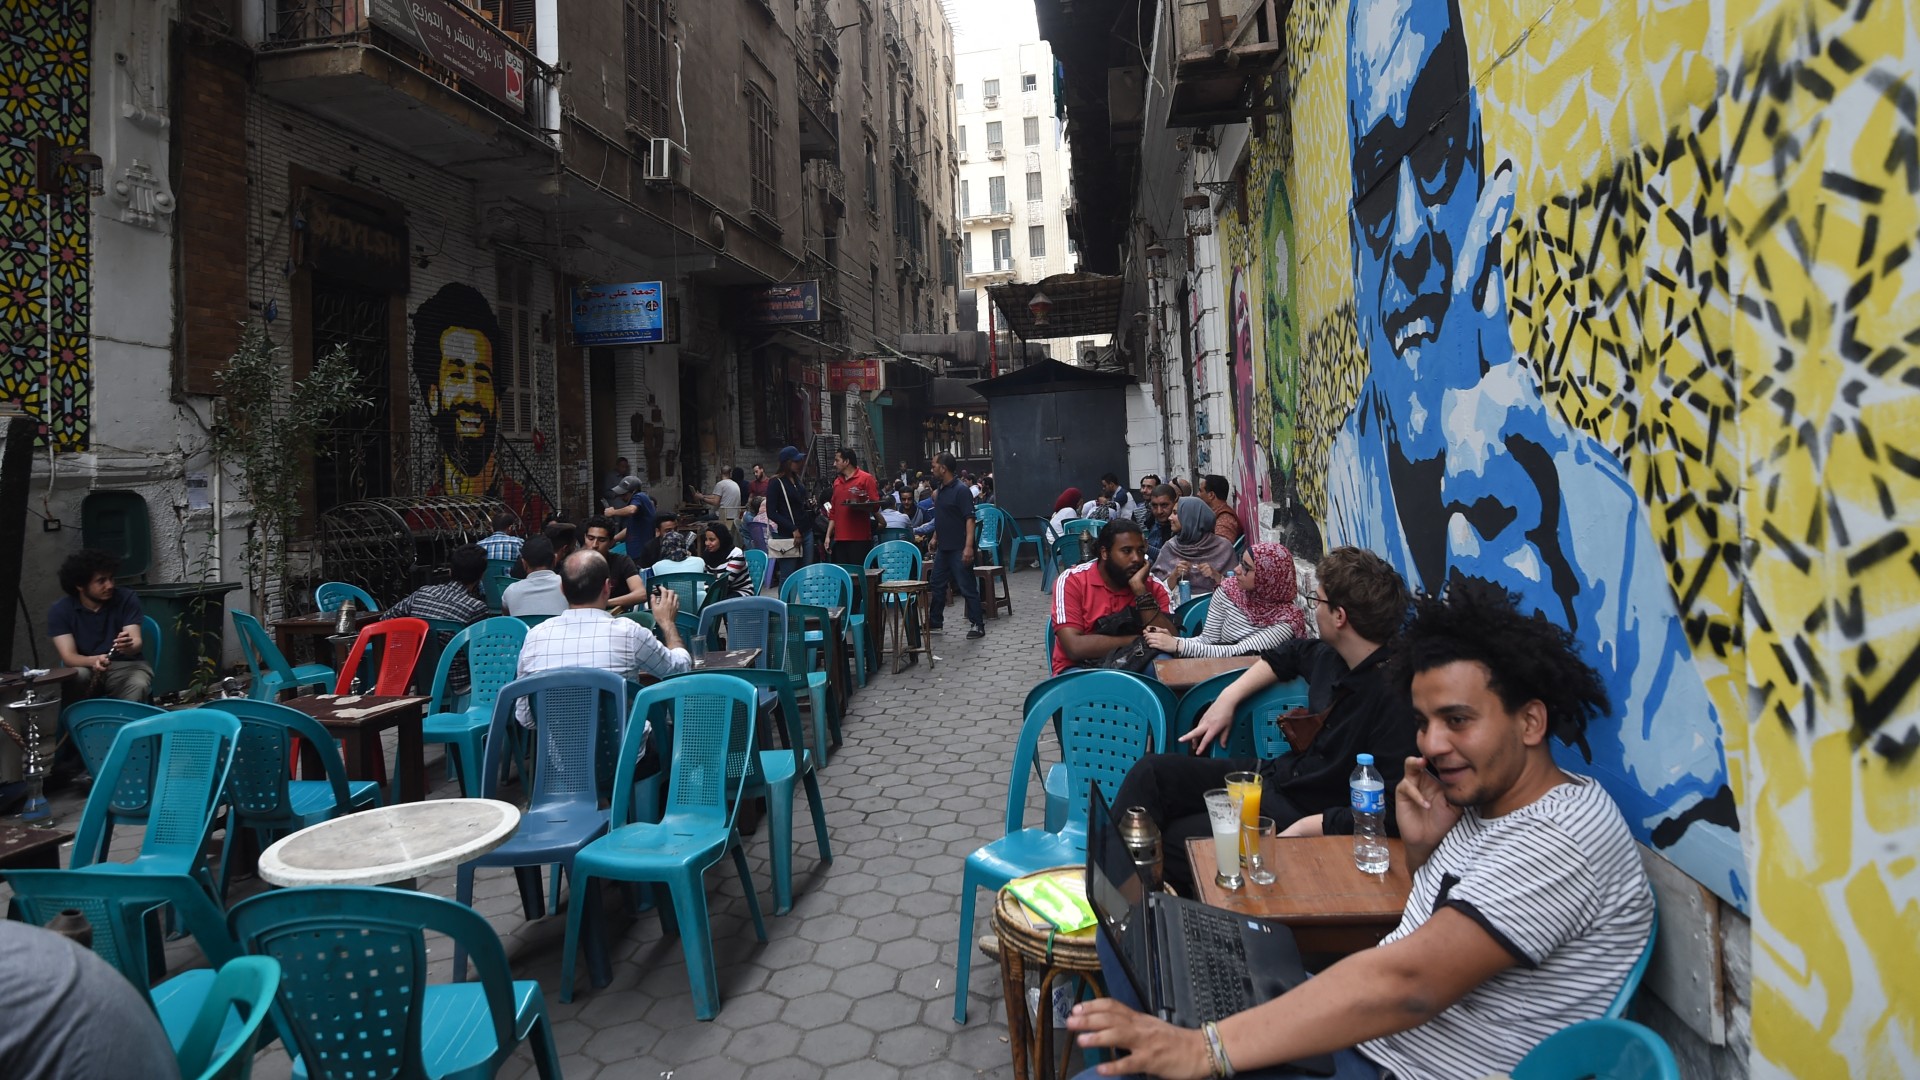 Egyptians gather at a cafe with graffiti on the walls bearing portraits of Egyptian footballer Mohamed Salah (L) and Nobel laureate Naguib Mahfouz (R), in central Cairo on 22 March, 2018 (AFP)